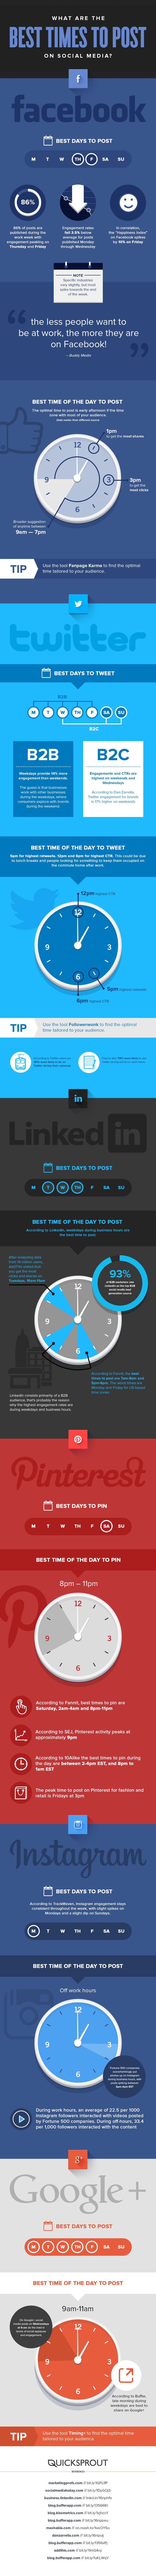 The Best Times to Post on Social Media Infographic image